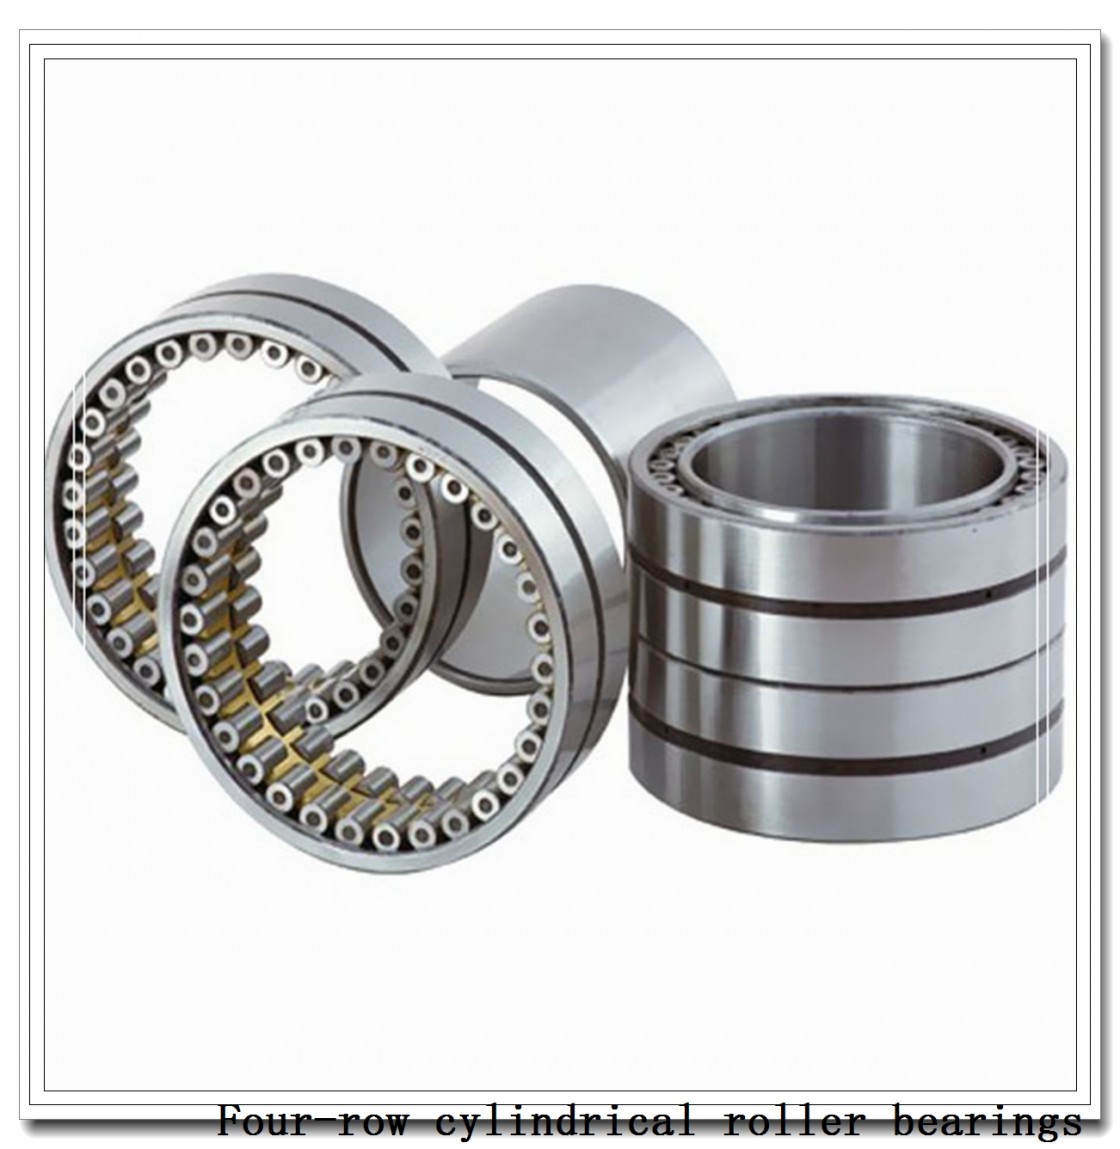 650RX2841C RX-1 Four-Row Cylindrical Roller Bearings